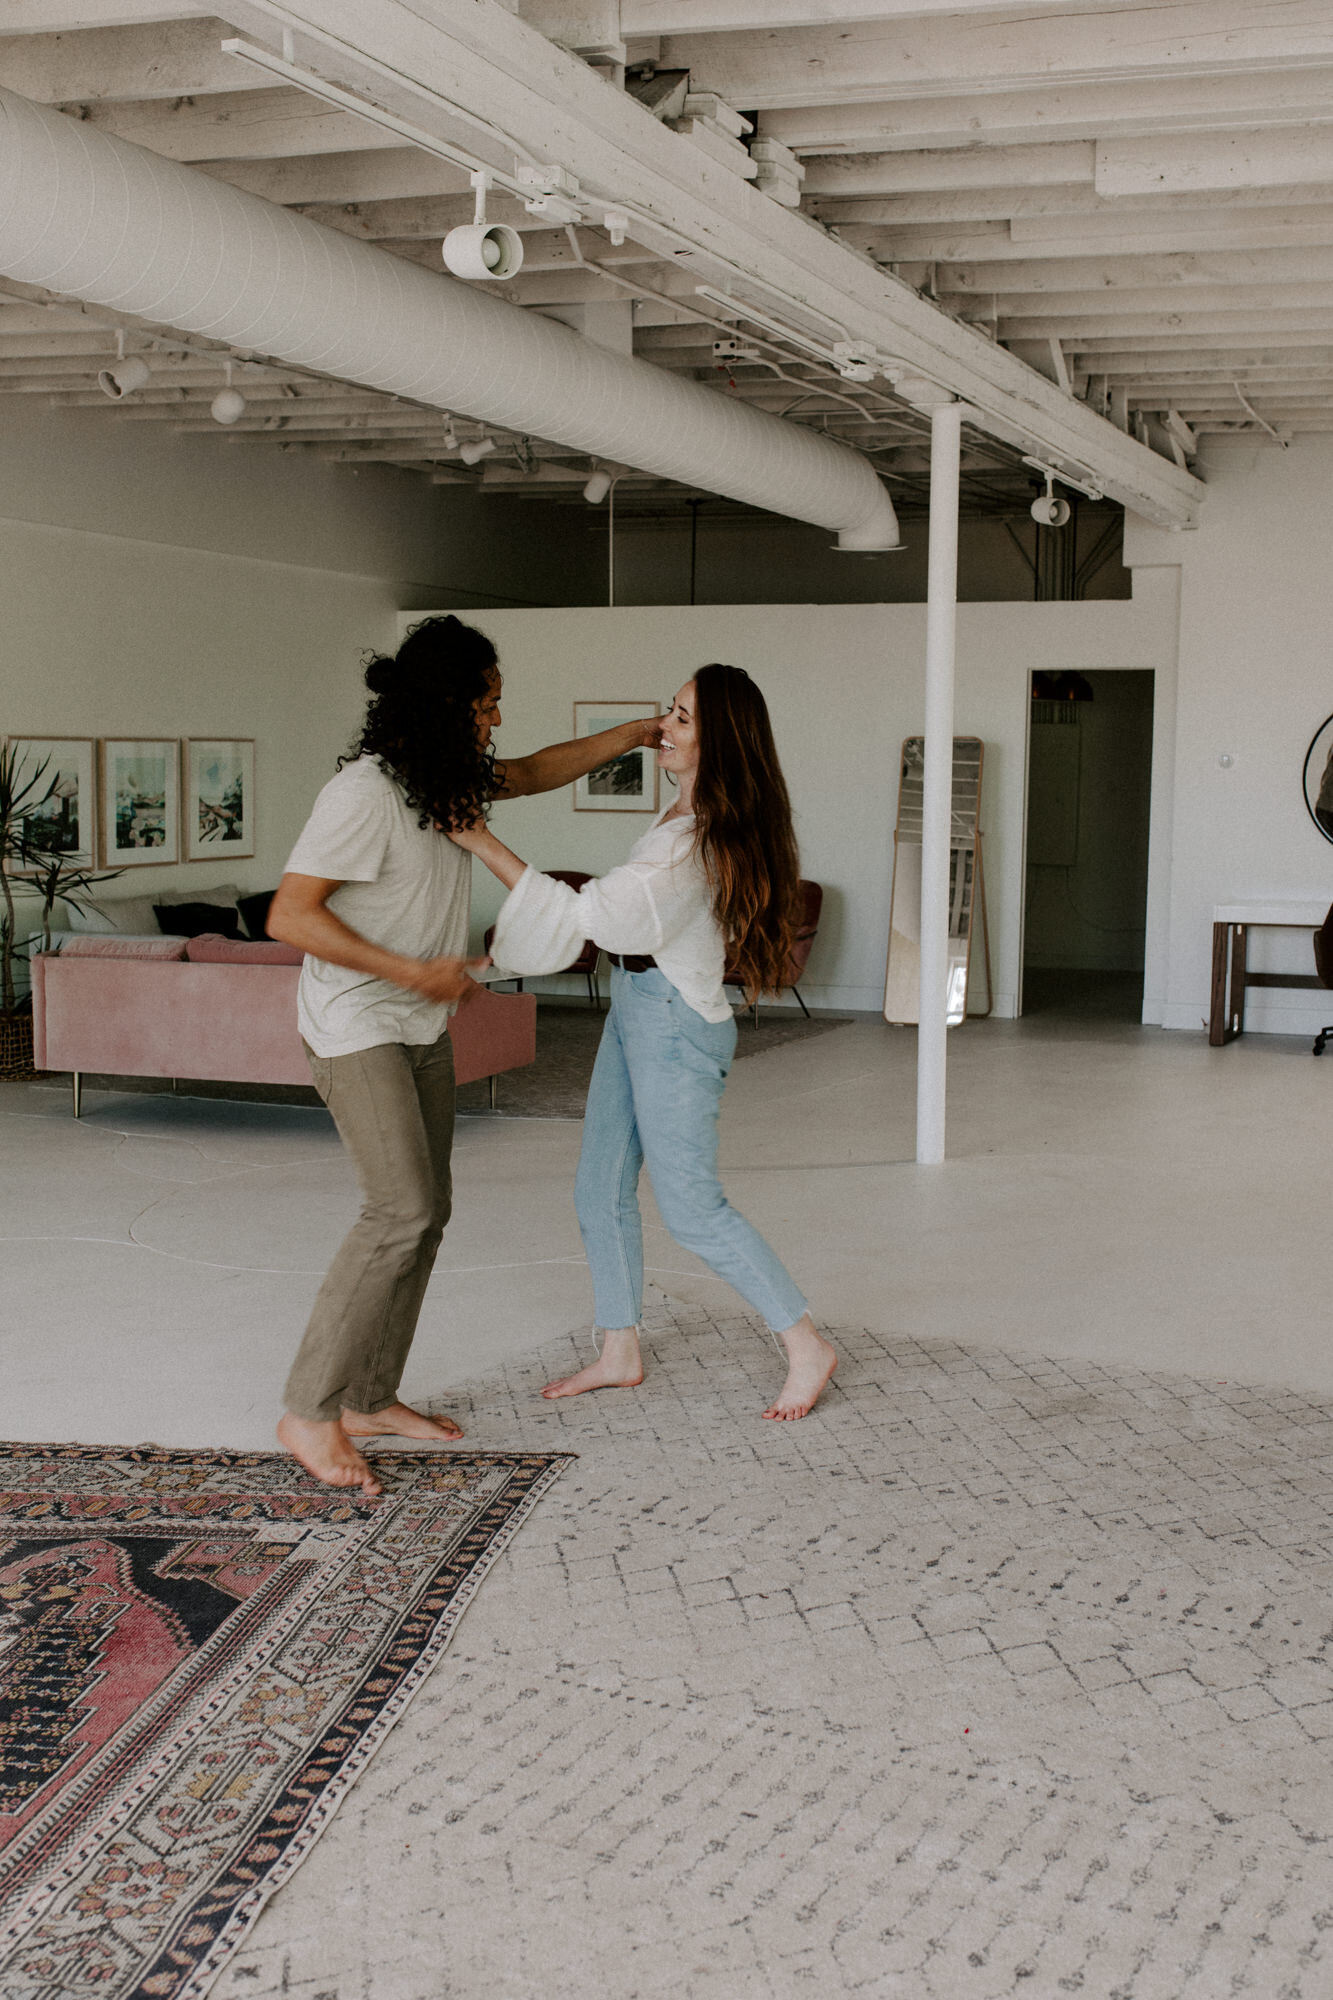 During an in home photography session with wedding photographer Diana Coulter, a Denver, Colorado couple dances together before social distancing and quarantine